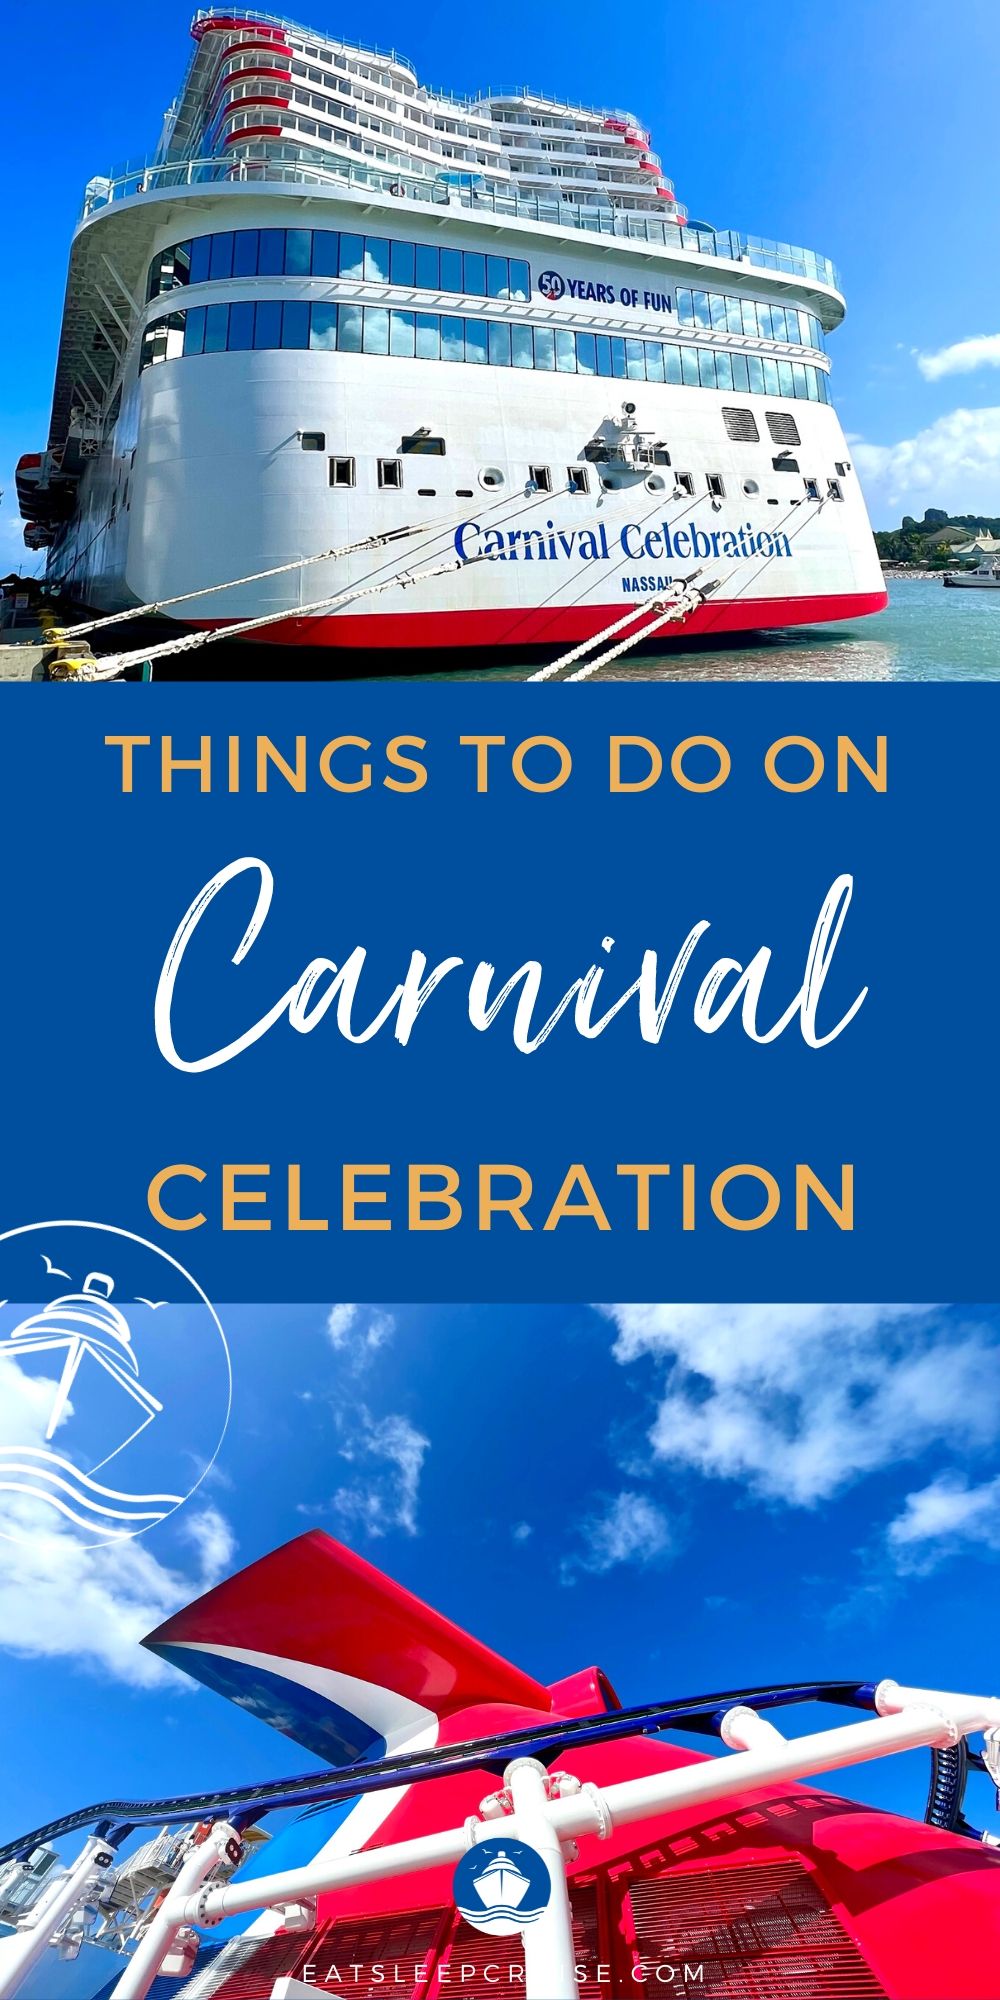 Things to Do on Carnival Celebration